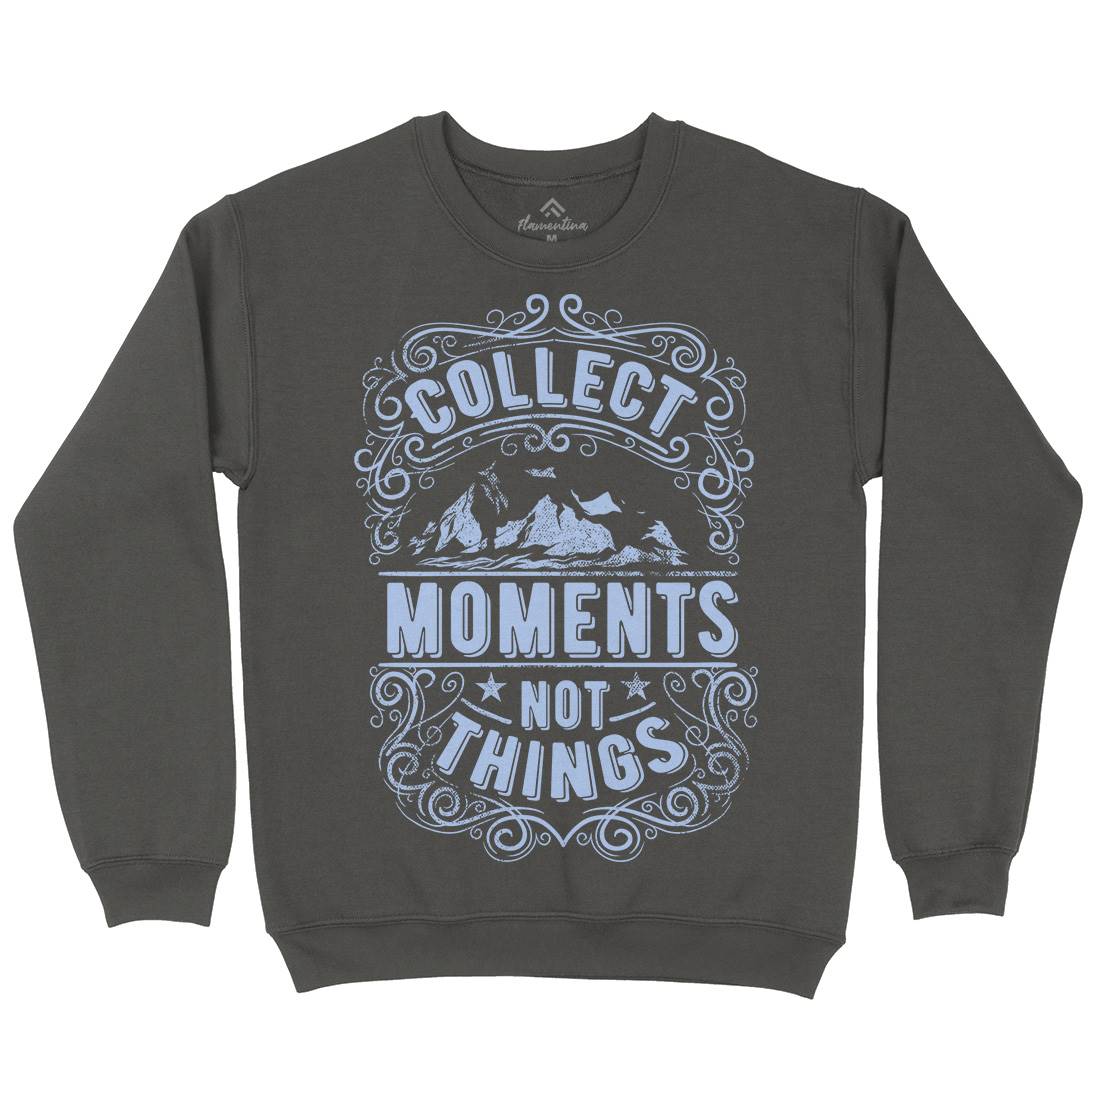 Collect Moments Not Things Kids Crew Neck Sweatshirt Quotes C918